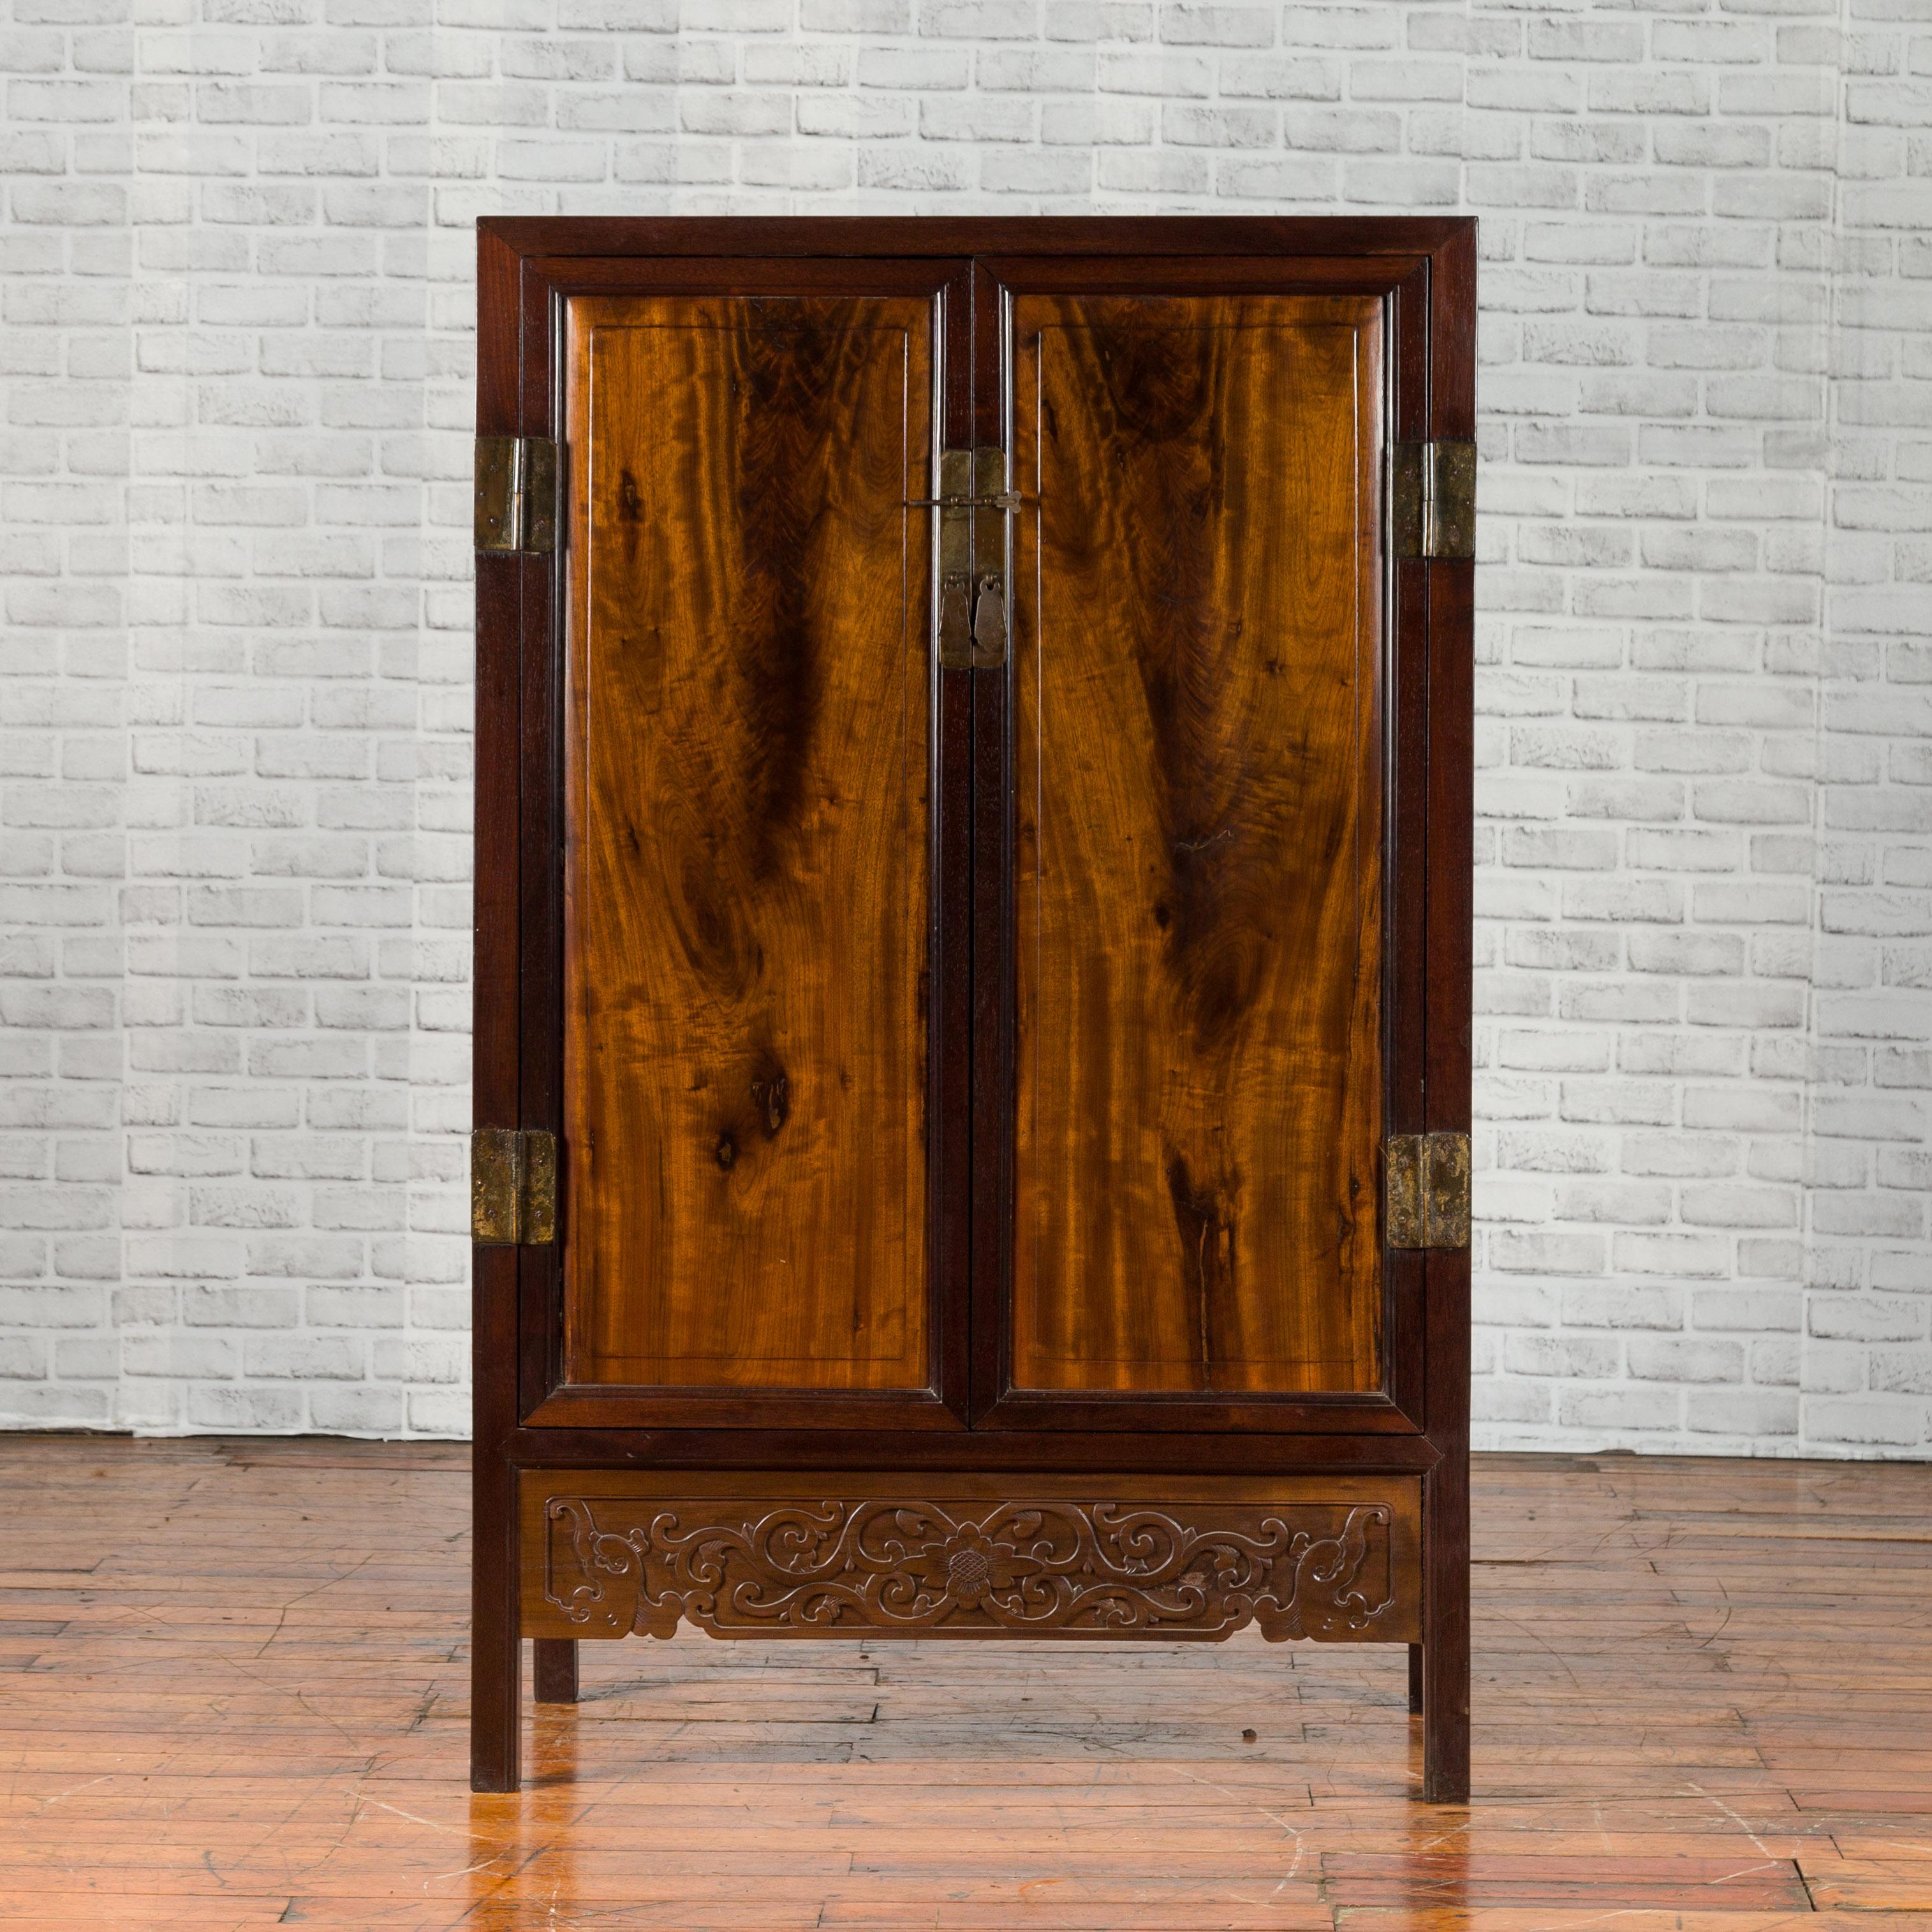 A Chinese dark wood cabinet from the early 20th century with two-toned panels and carved apron. Created in China during the early years of the 20th century, this cabinet features a linear silhouette perfectly accented by a two-toned finish. The dark